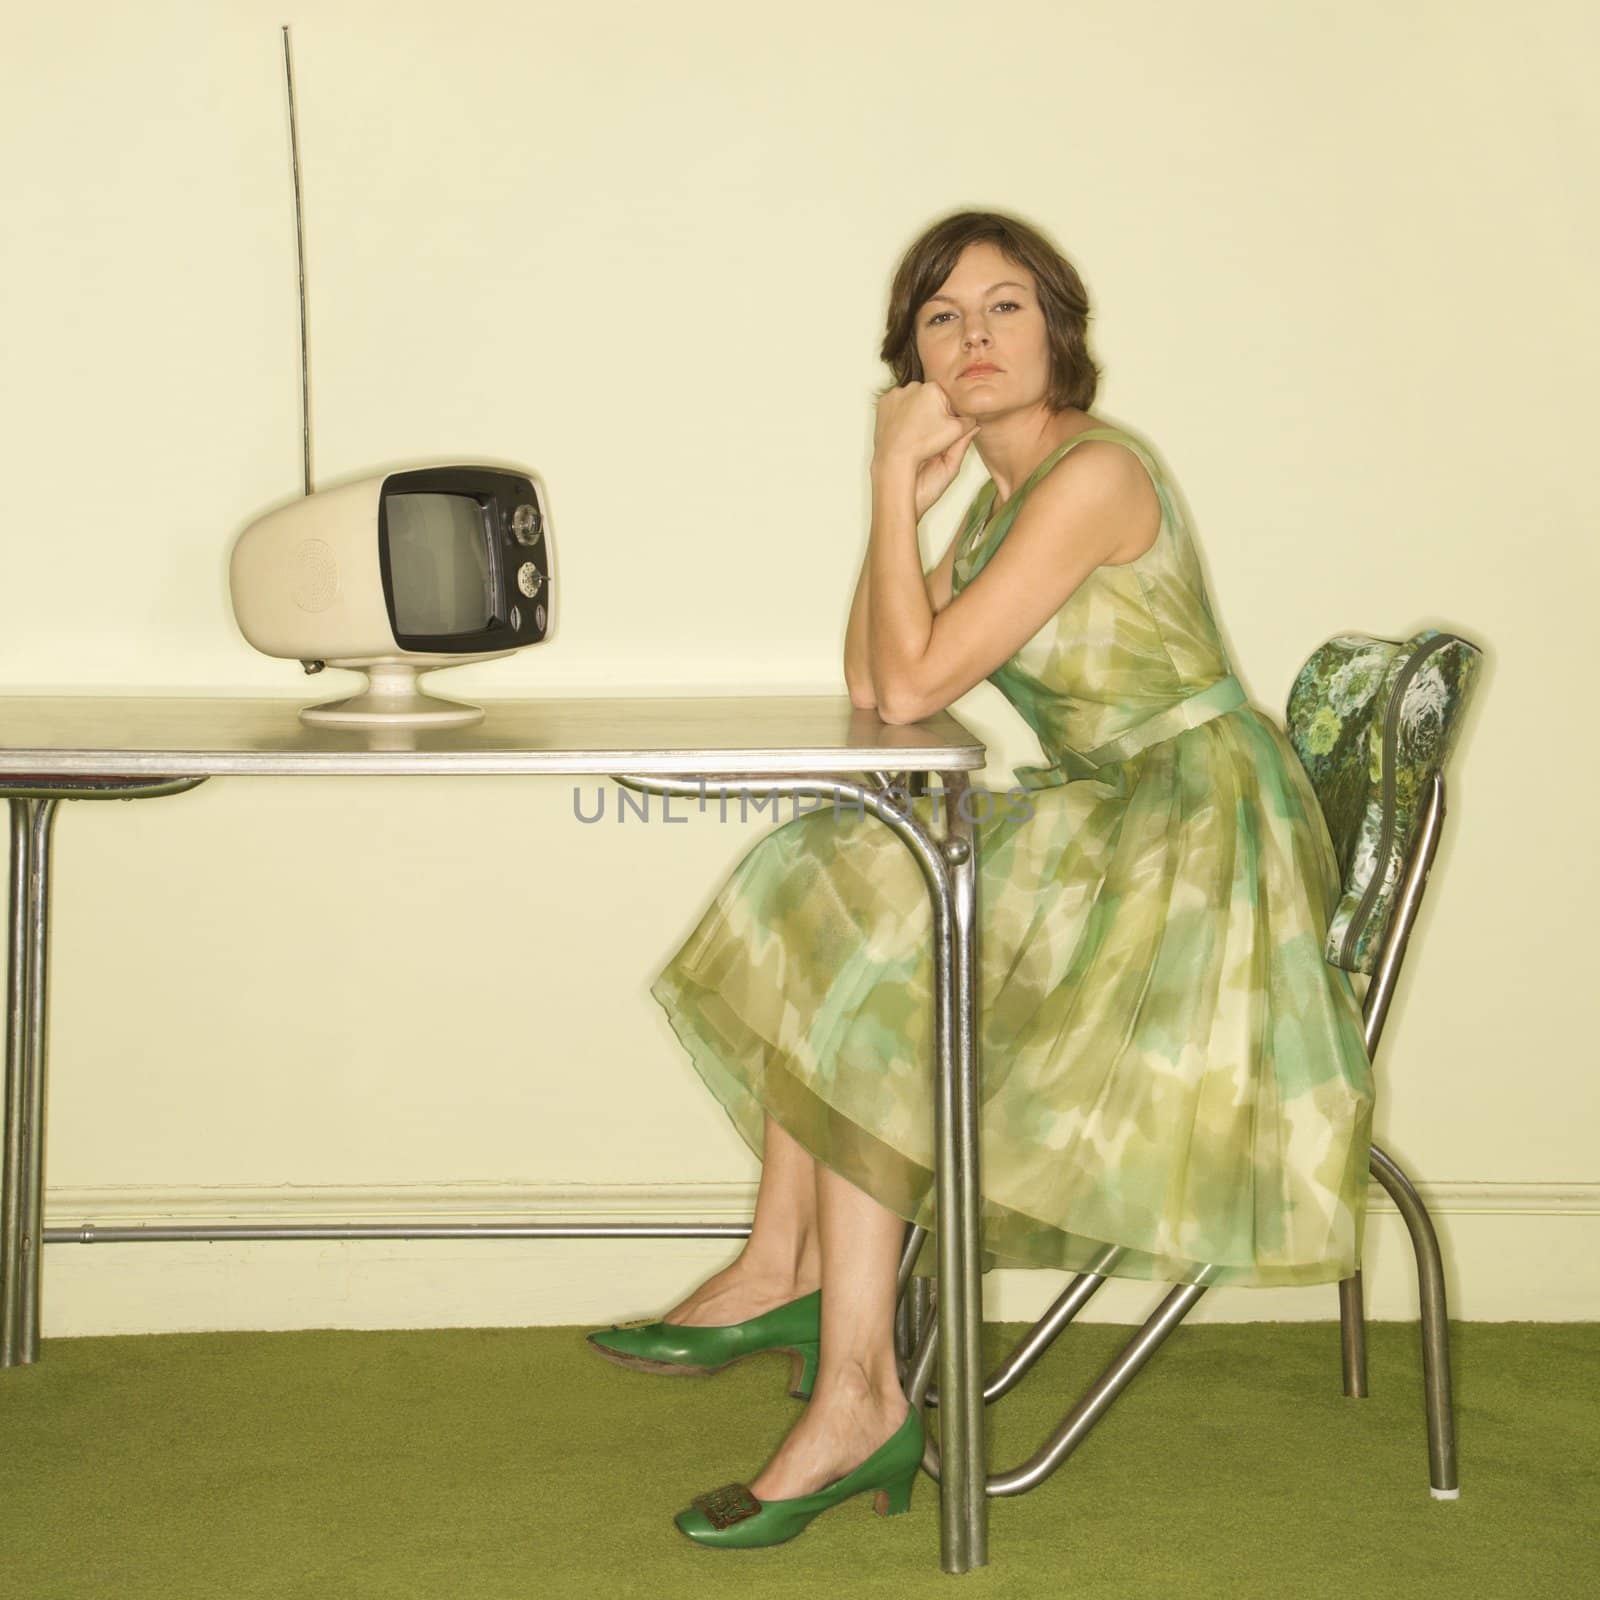 Pretty Caucasian mid-adult woman wearing green vintage dress sitting at 50's retro dinette in front of old televsion looking bored.